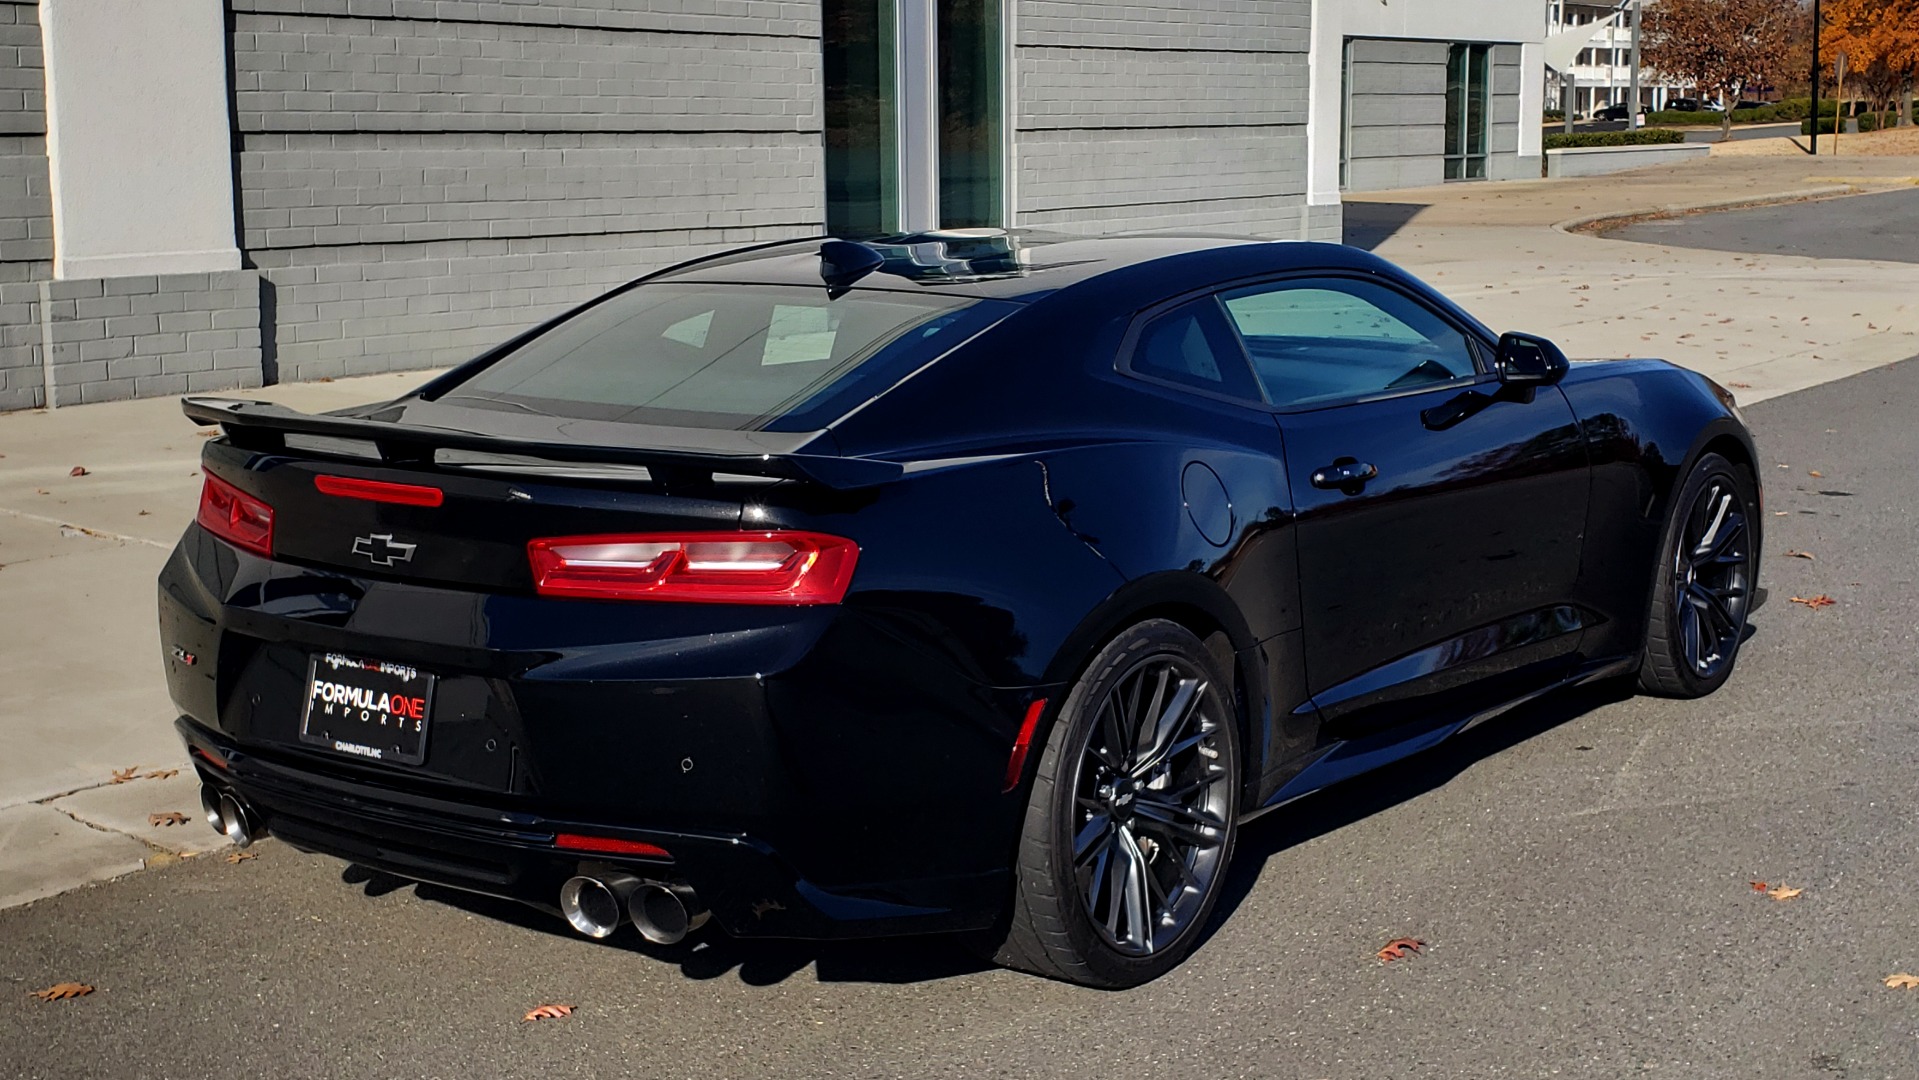 Used 2017 Chevrolet CAMARO ZL1 COUPE / 6.2L SC LT4 V8 (650HP) / 6-SPD MAN / NAV / BOSE / REARVIEW for sale Sold at Formula Imports in Charlotte NC 28227 10